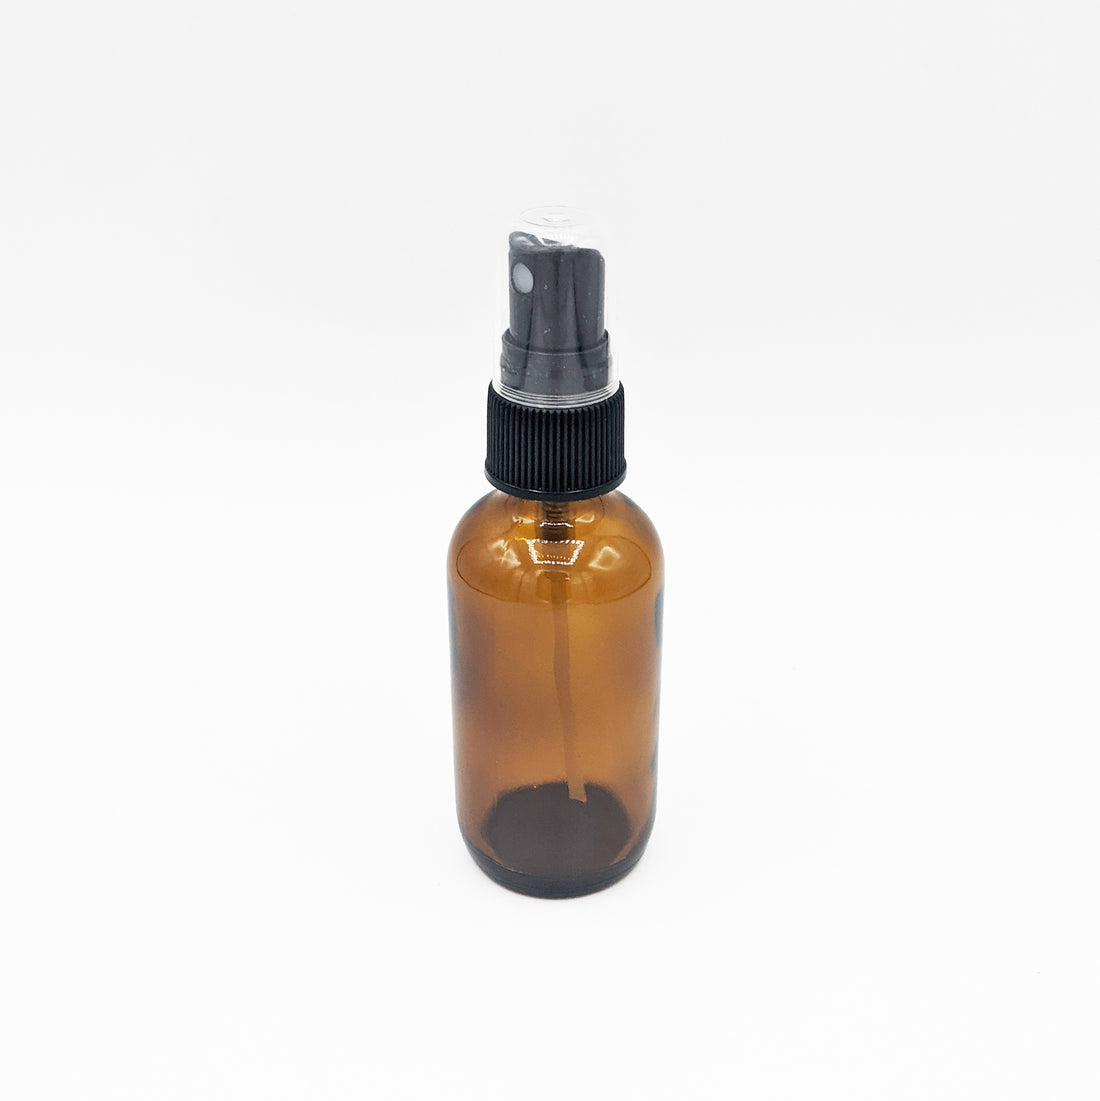 Amber glass bottle with spray nozzle